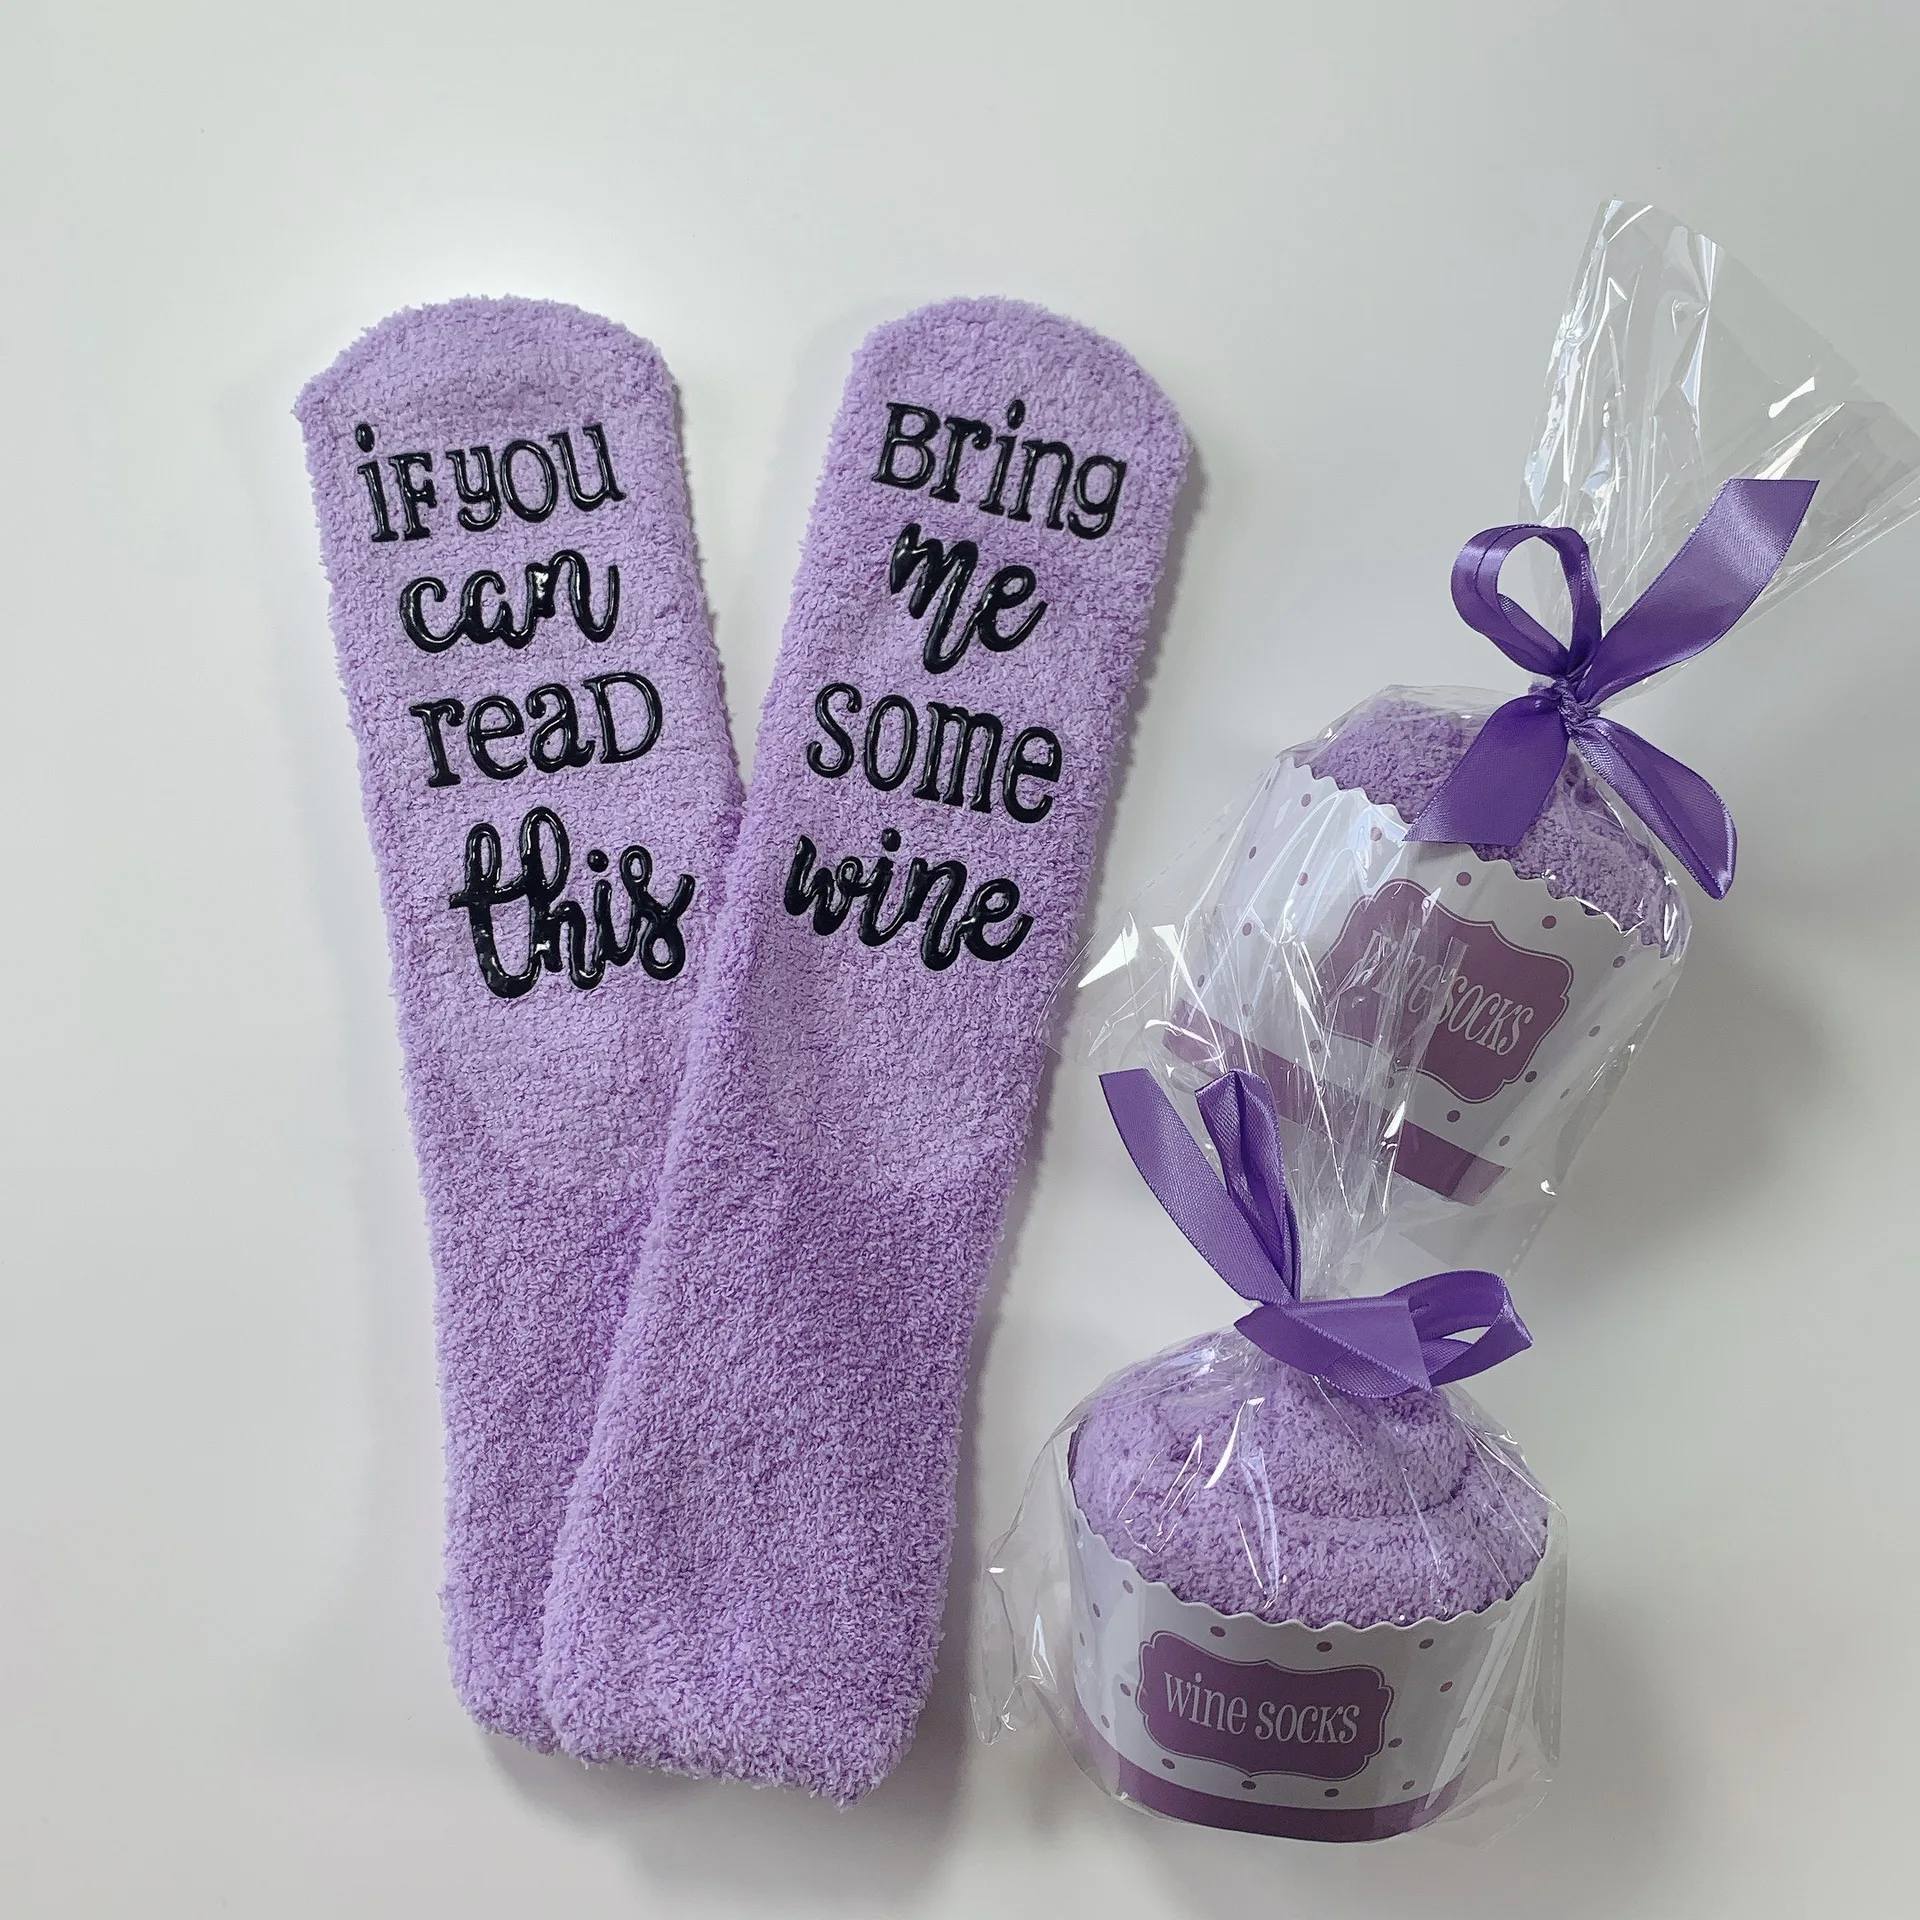 

Custom Grip Girly Pink socks Terry Non-slip Funny Interesting If You Can read this women Cake socks, Colors